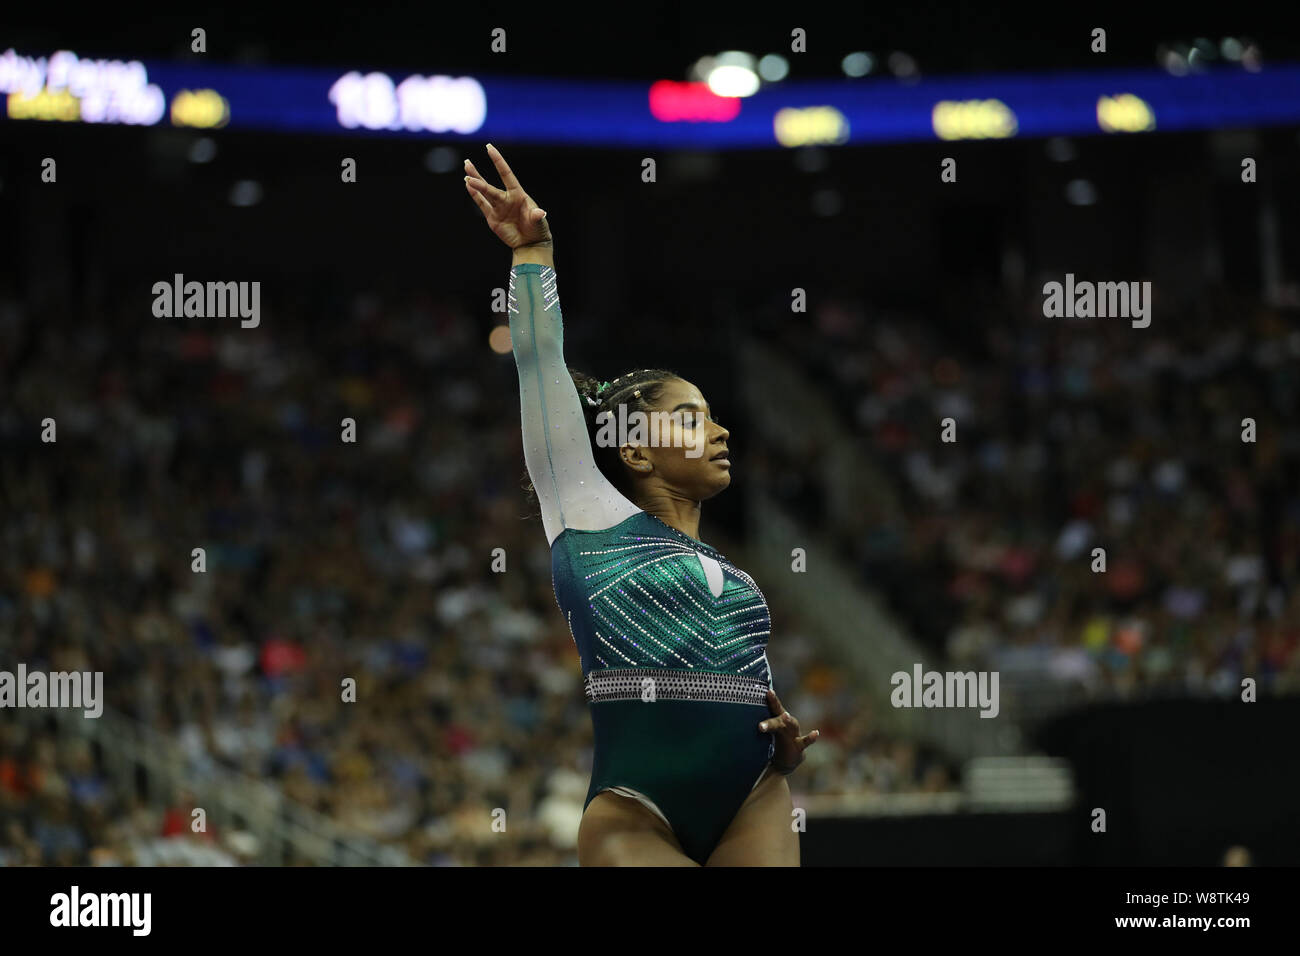 August 9, 2019: Gymnast Jordan Chiles competes during day one of the senior women's competition at the 2019 US Gymnastics Championships, held in Kansas City, MO. Melissa J. Perenson/CSM Stock Photo